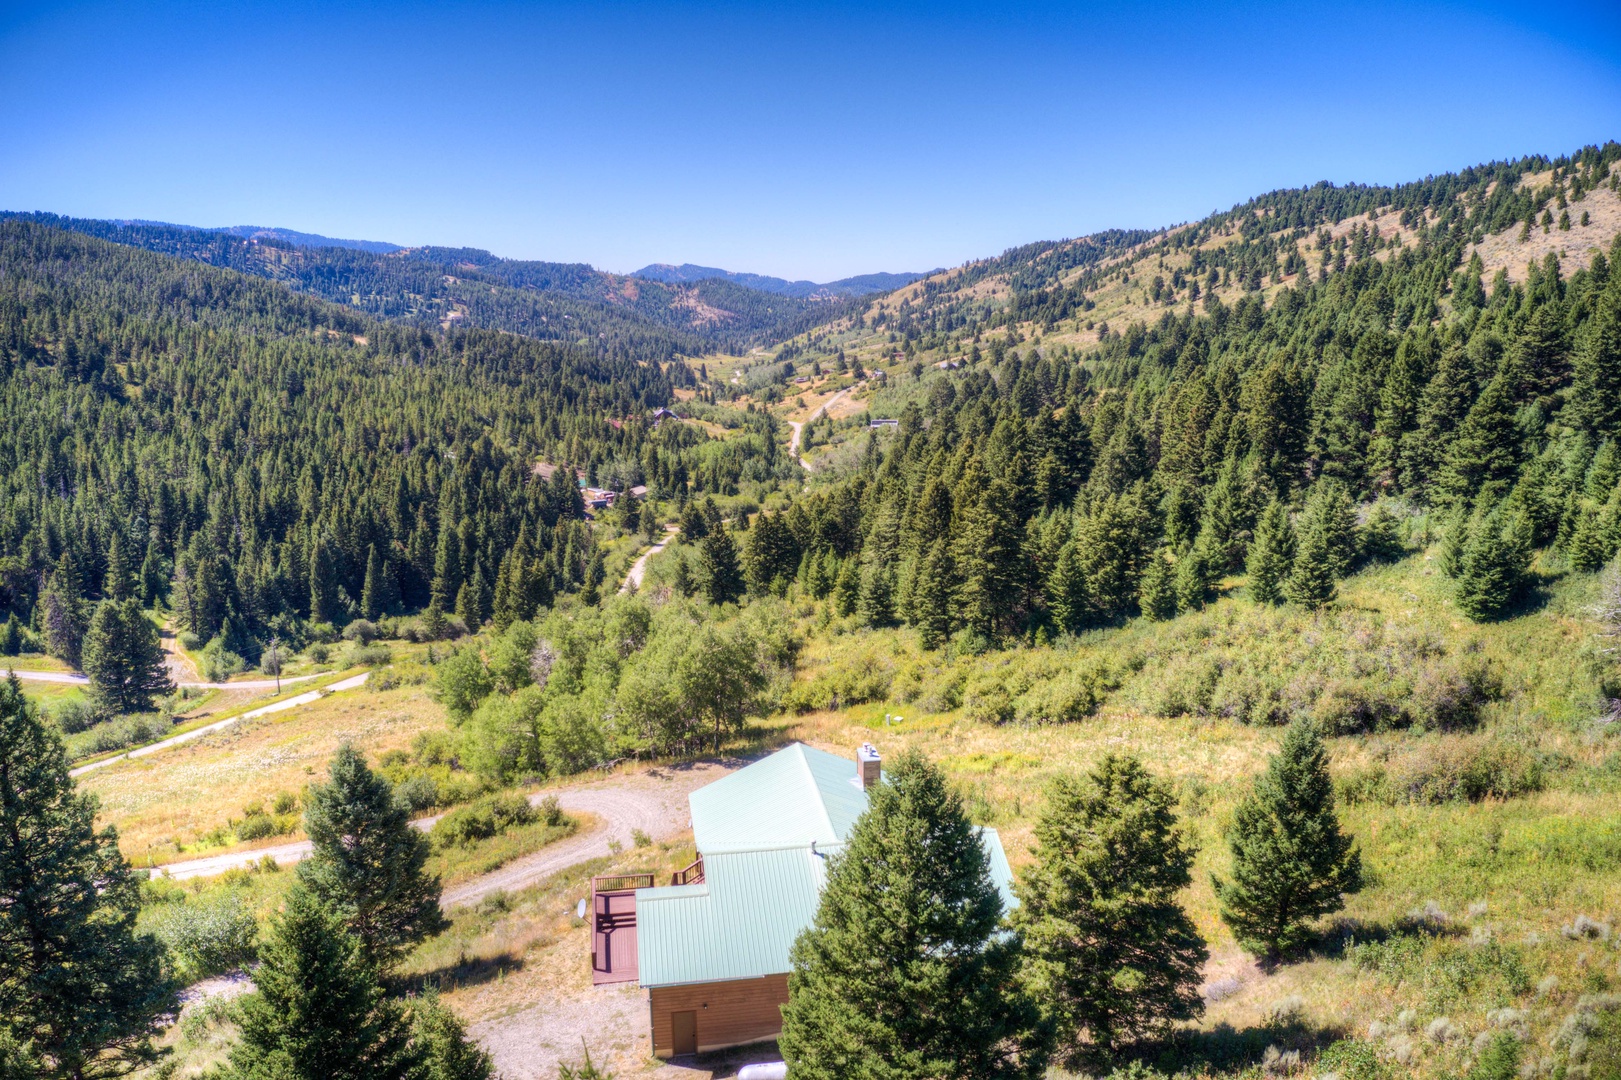 Bozeman Vacation Rentals, The Canyon Lookout - So secluded and private